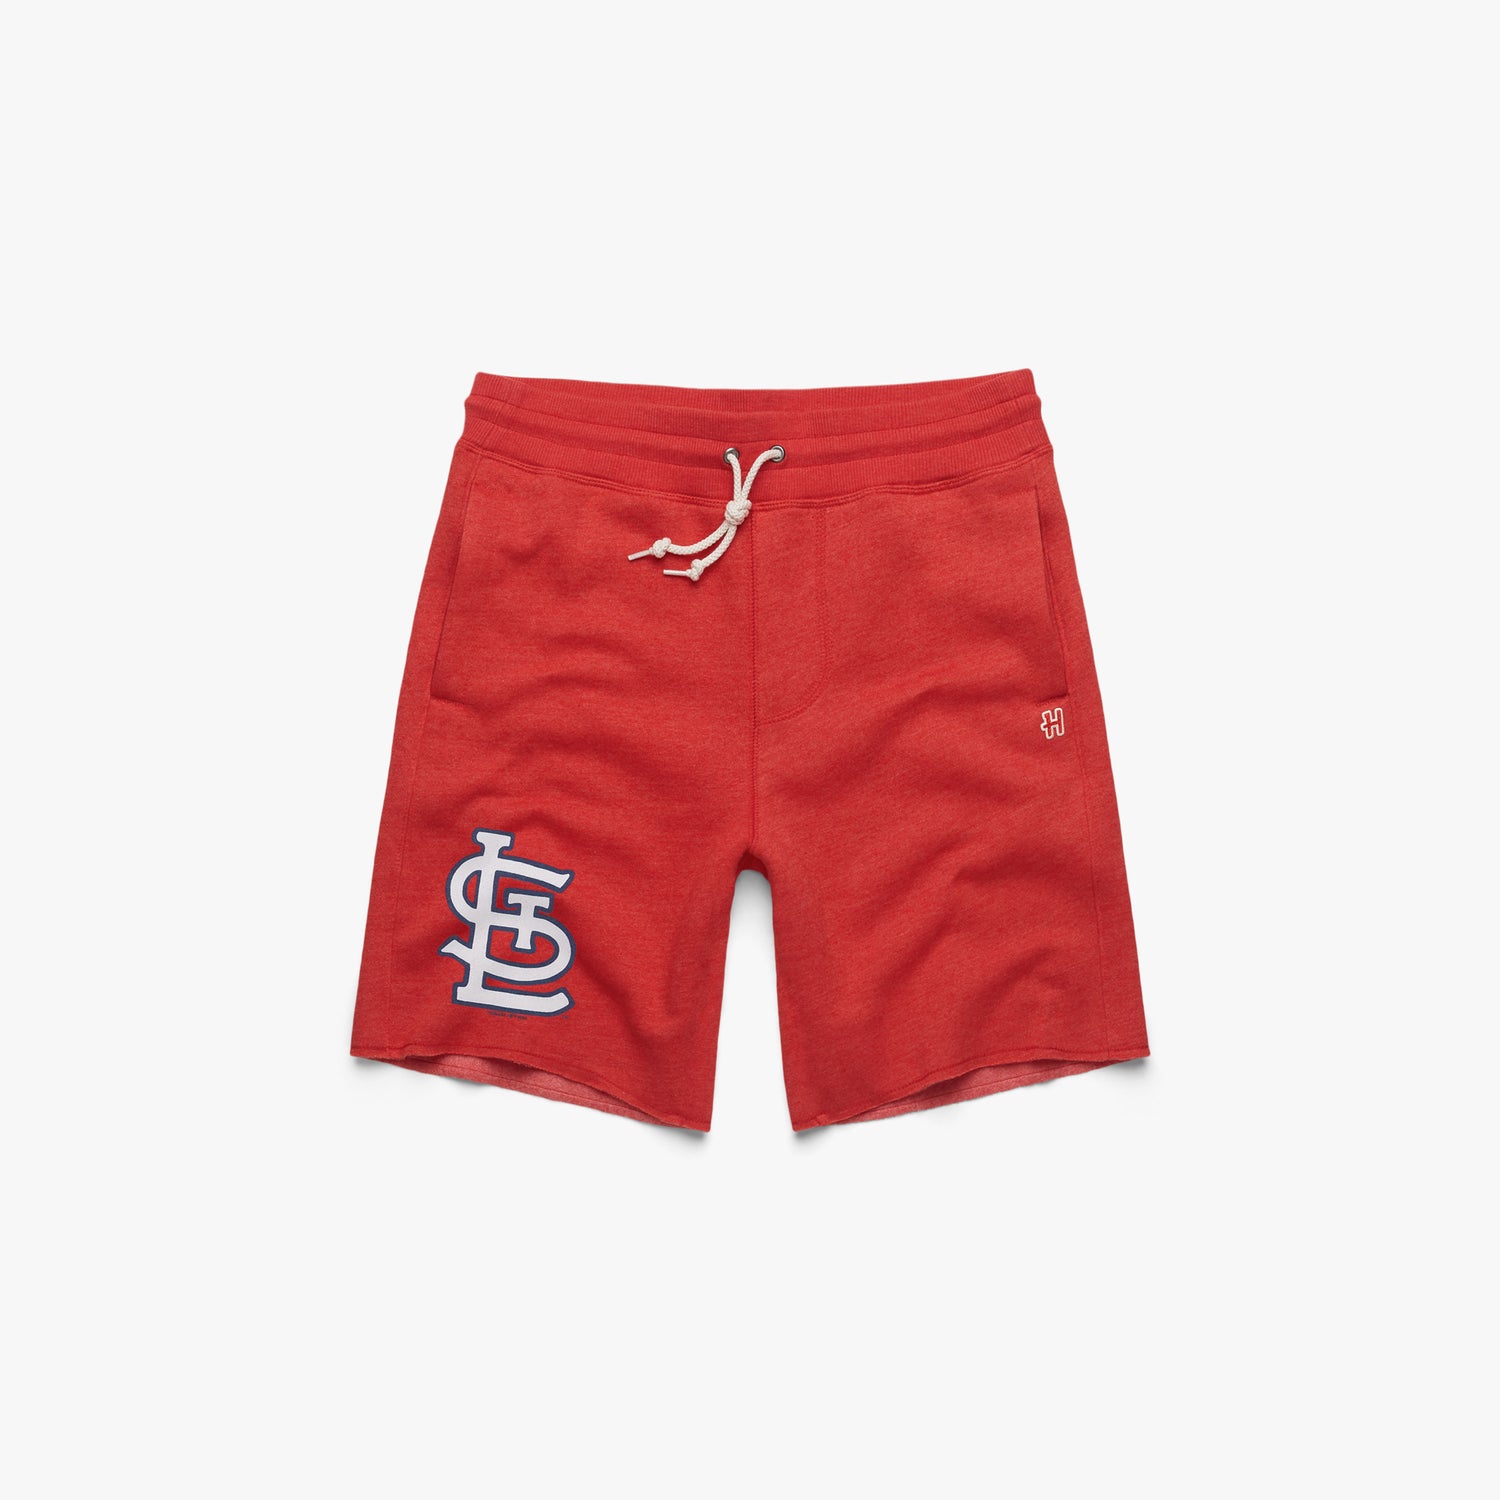 St. Louis Cardinals Logo Sweat Shorts from Homage. | Red | Vintage Apparel from Homage.